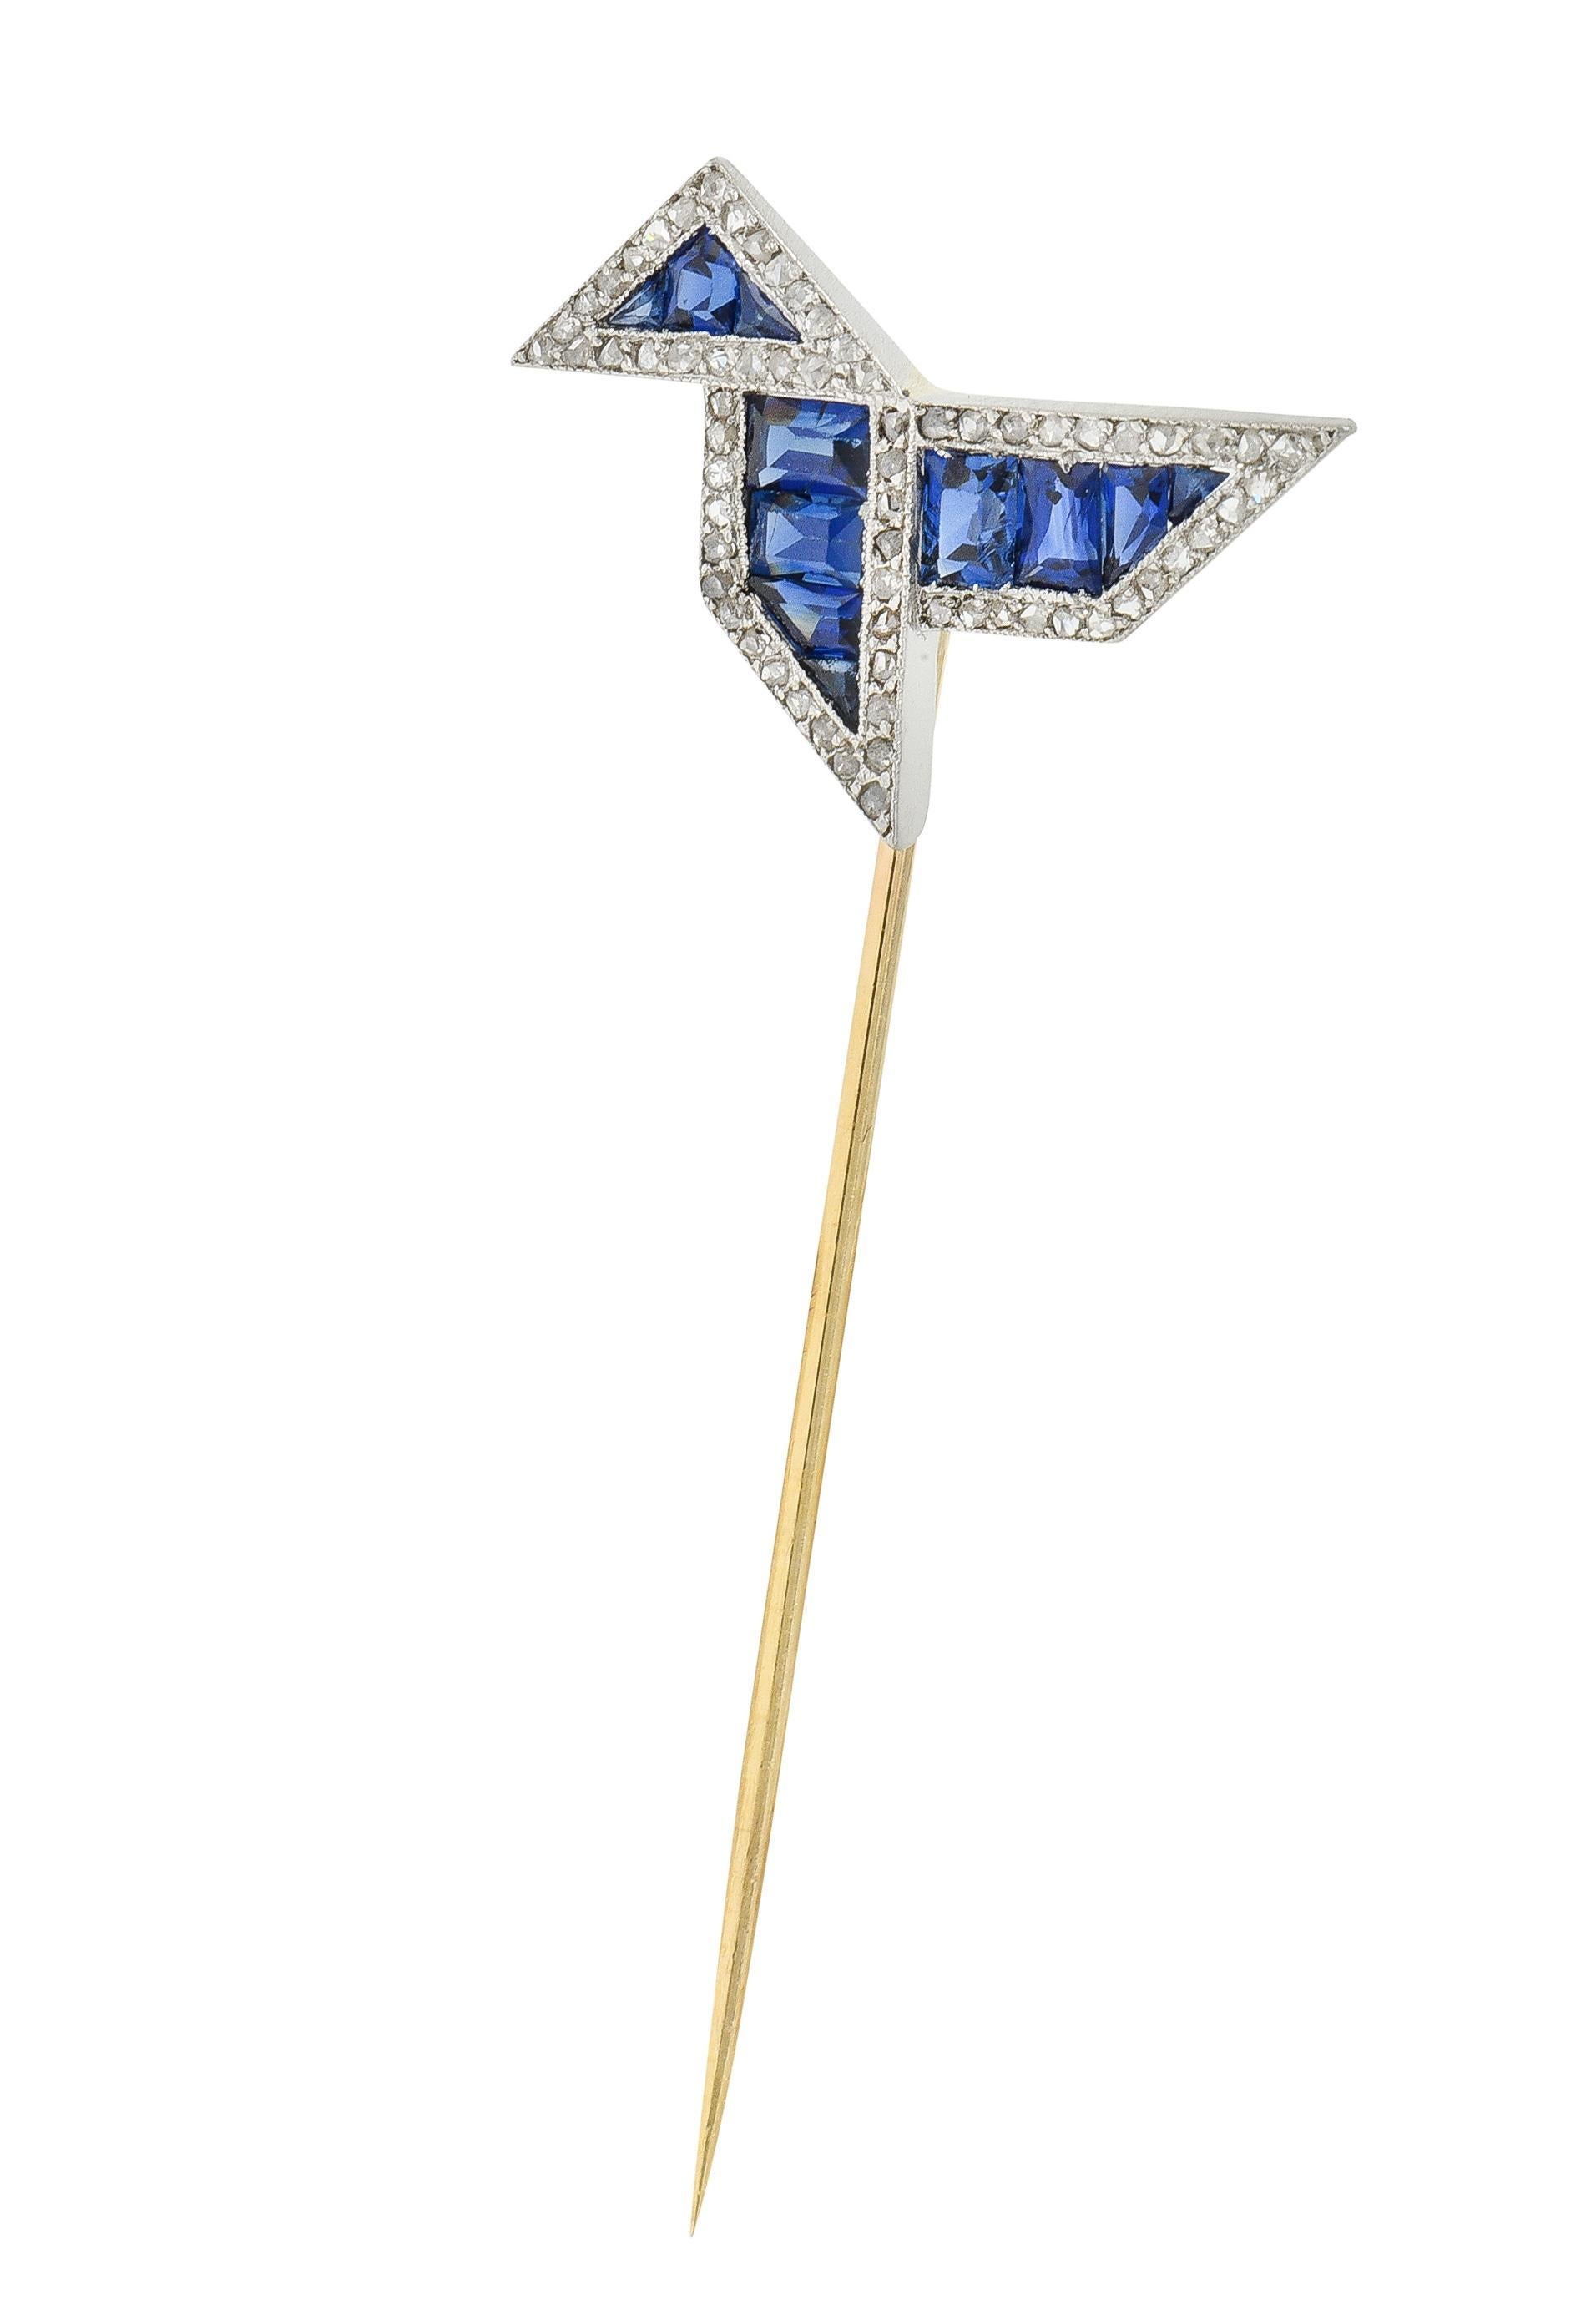 Designed as a stylized origami bird featuring baguette and calibré cut sapphires
Weighing approximately 2.16 carats total - medium transparent blue in color
Channel set on platinum with bead set rose cut diamond edges
Weighing approximately 0.38